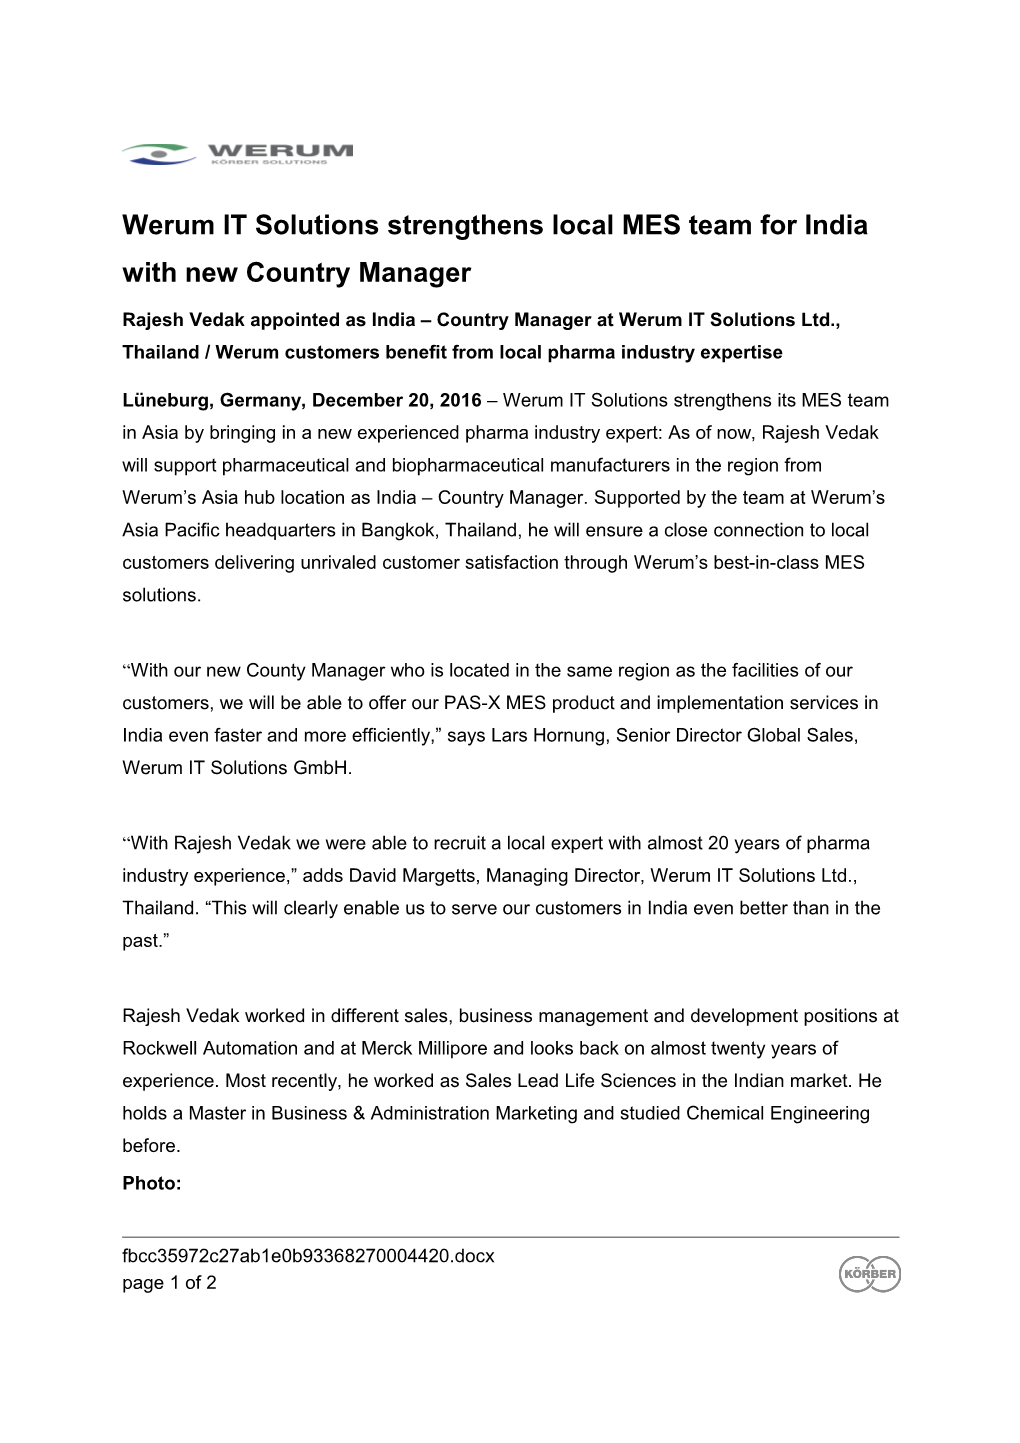 Rajesh Vedak Appointed As India Country Manager at Werum IT Solutions Ltd., Thailand